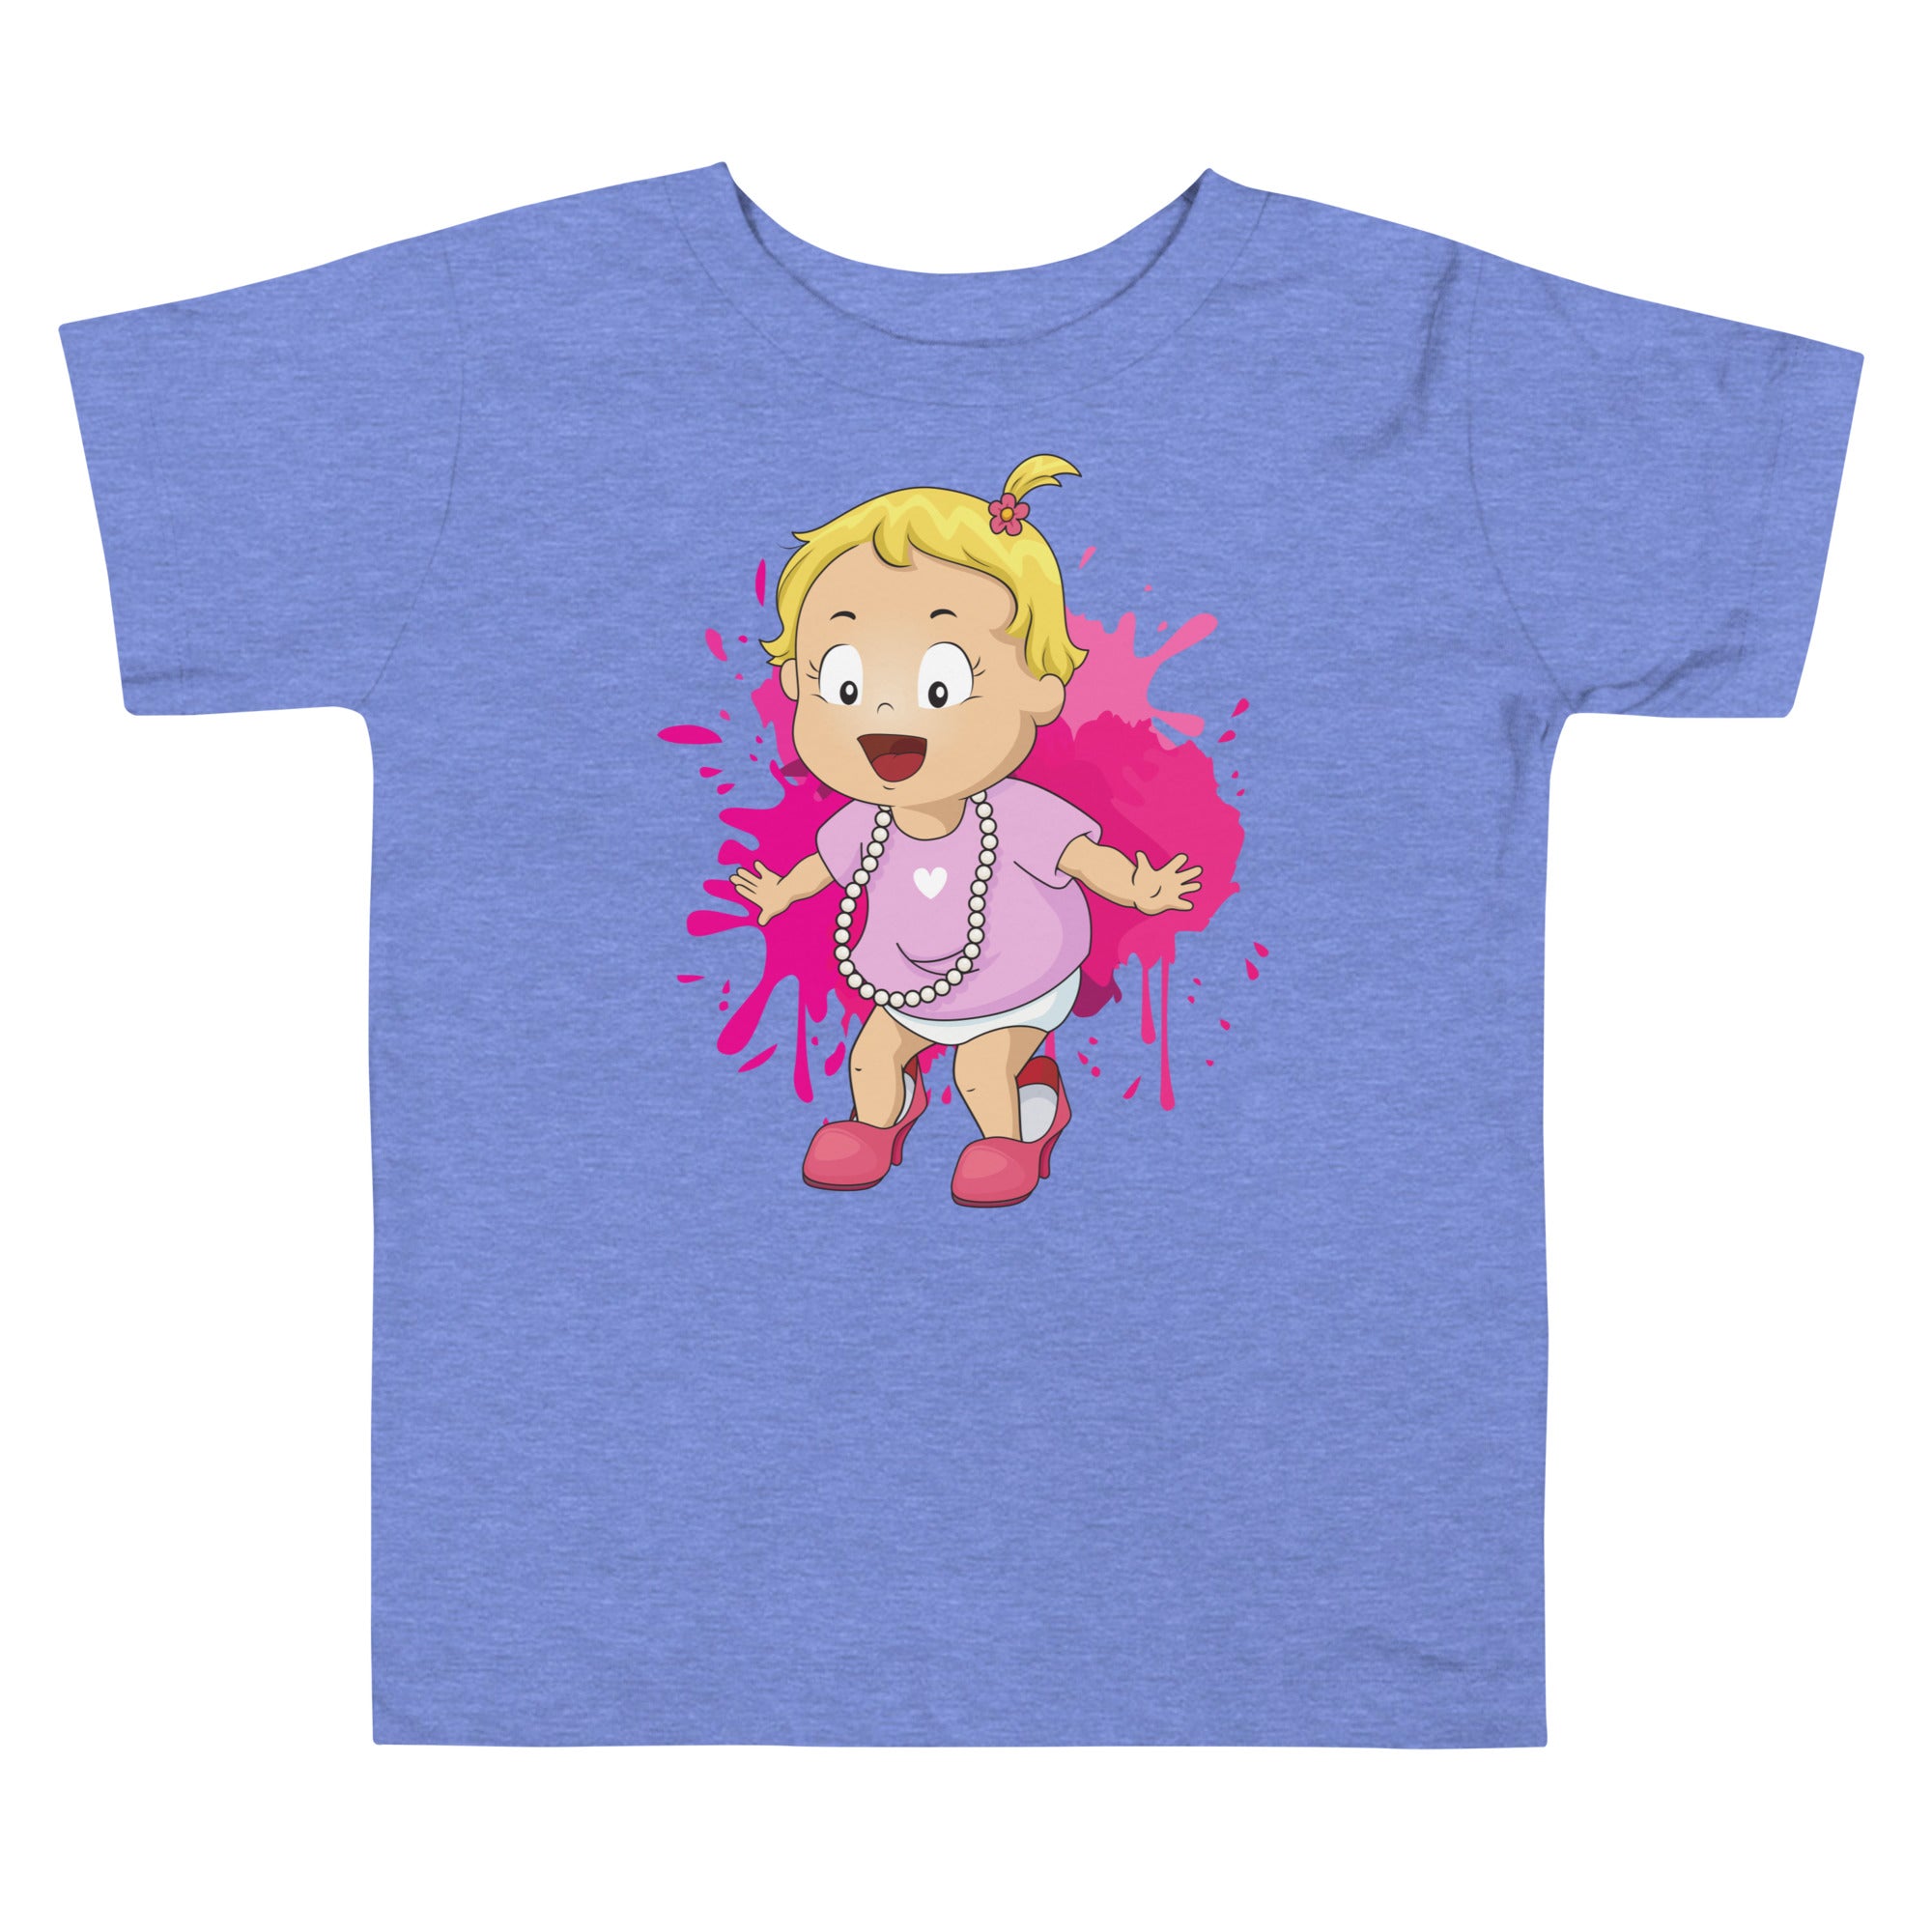 Toddler Short Sleeve Tee - Dress- Up (Colors)